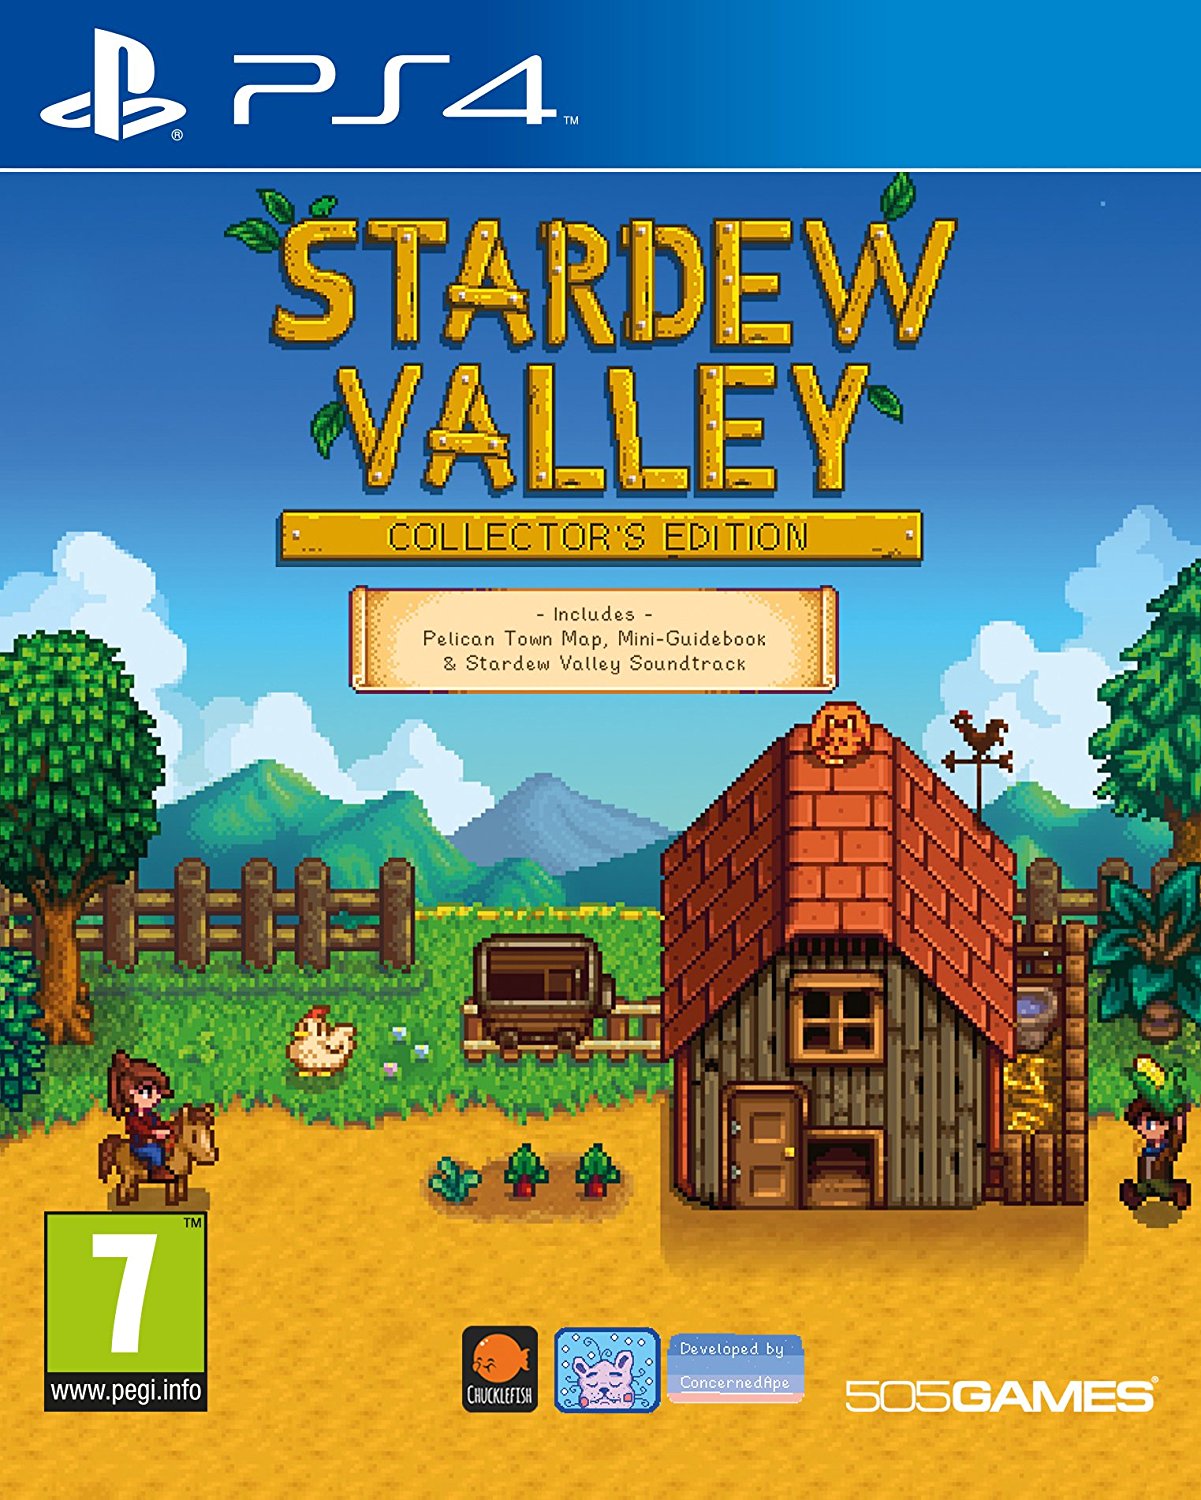 stardew valley full game download